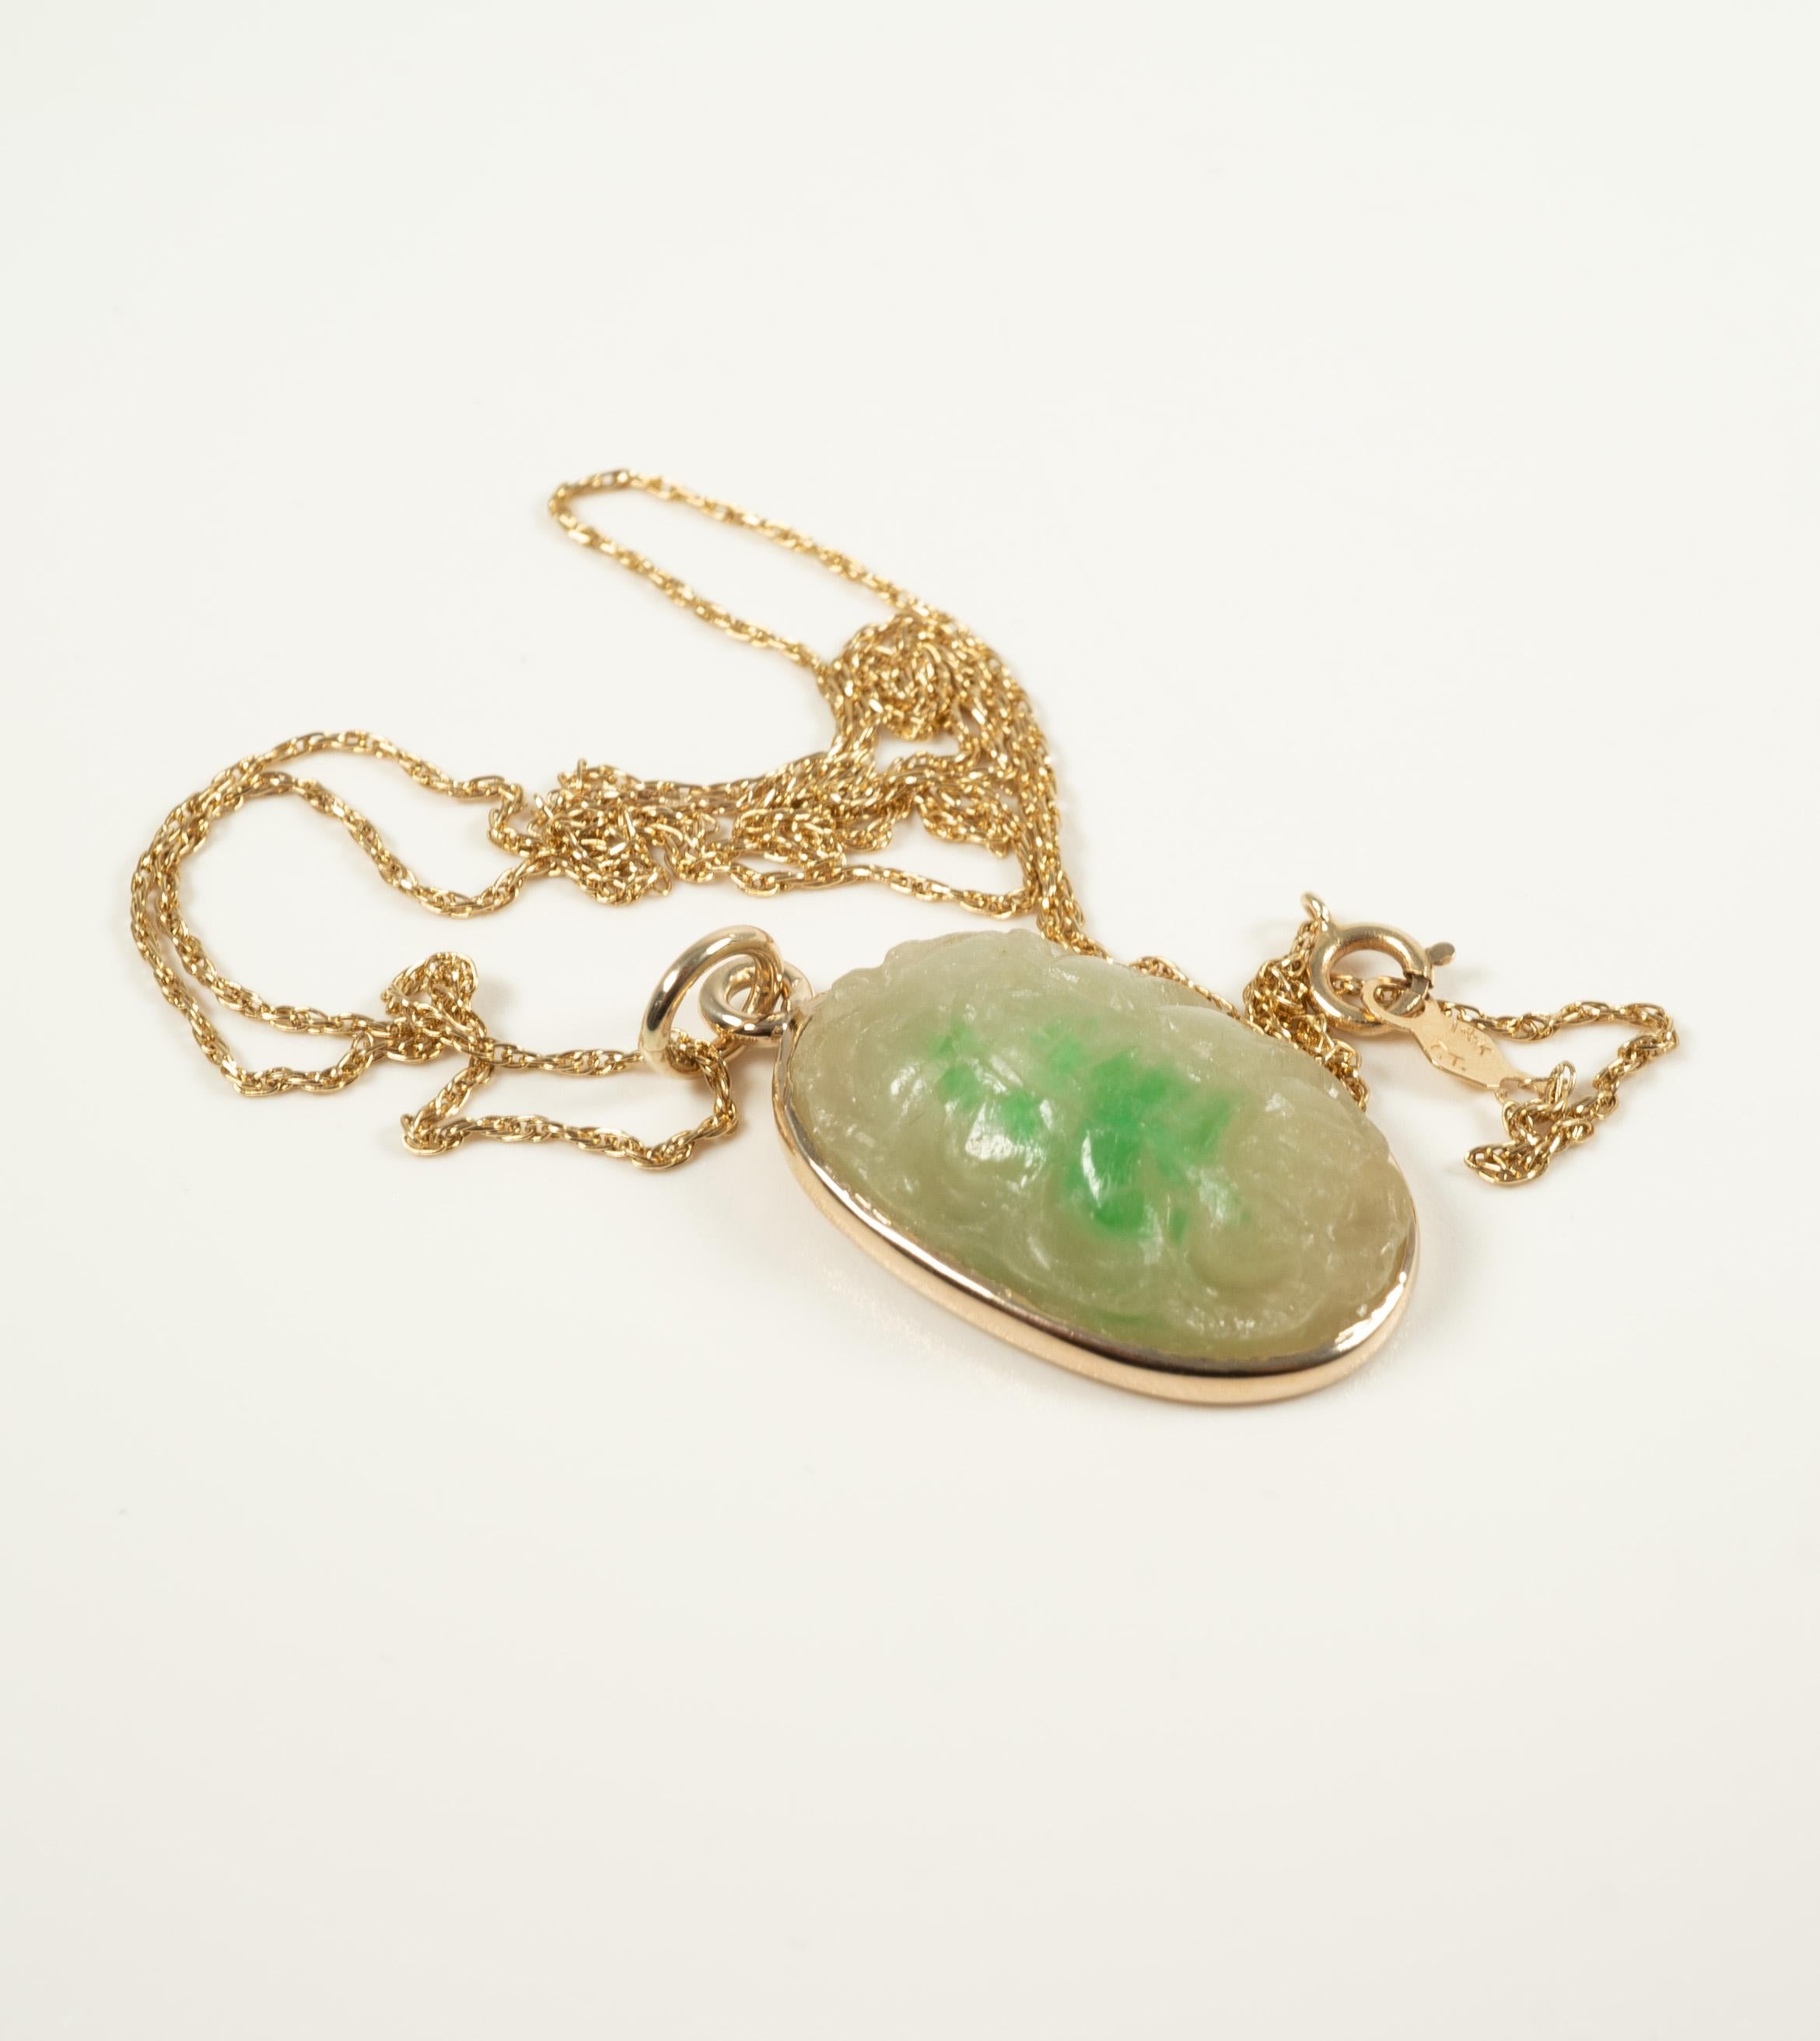 This lovely jade pendant measures 1.25